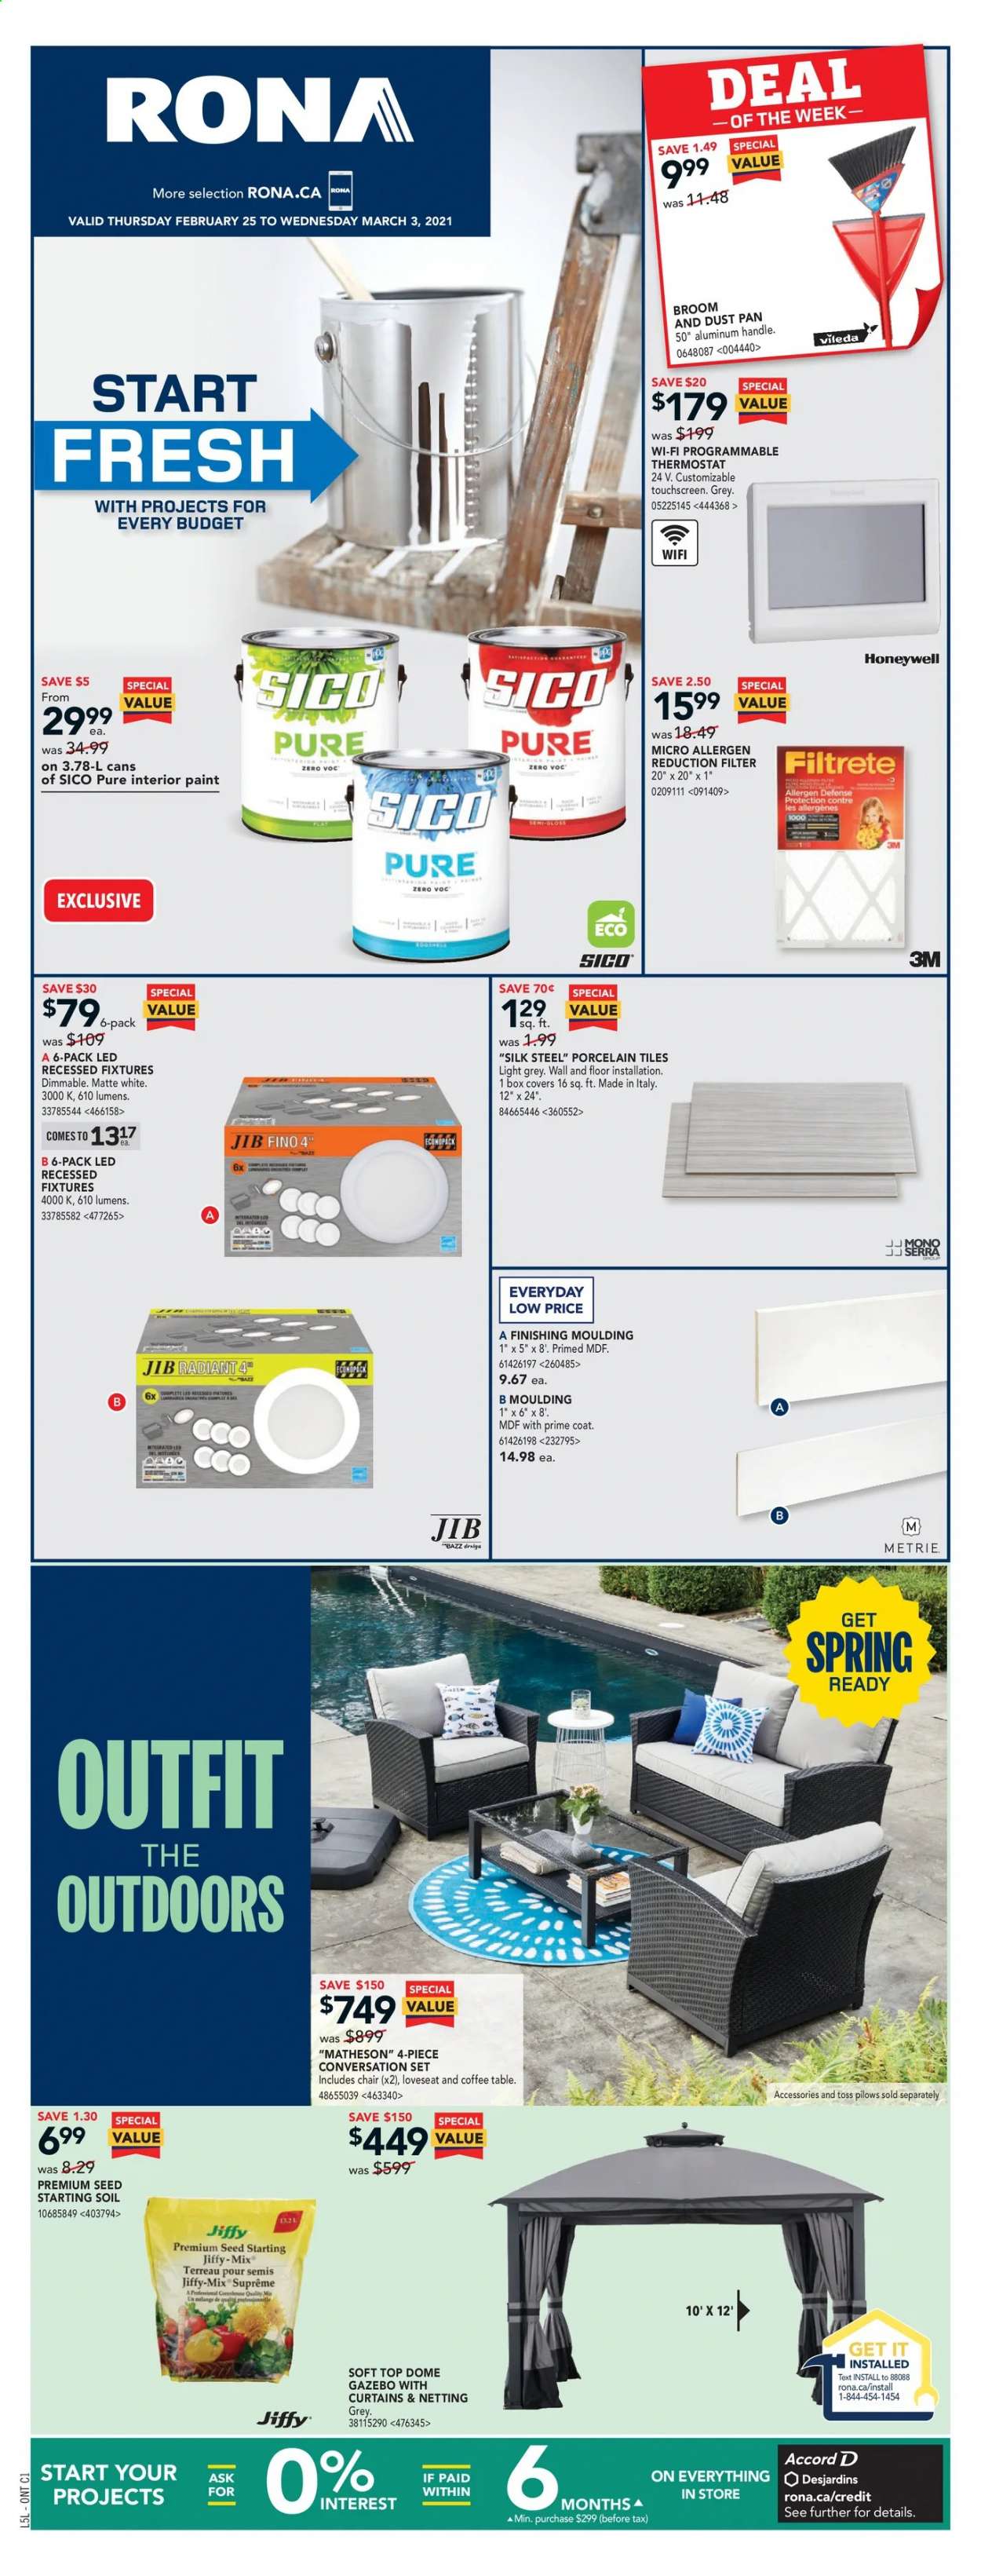 thumbnail - RONA Flyer - February 25, 2021 - March 03, 2021 - Sales products - Vileda, Honeywell, Filtrete, table, chair, loveseat, coffee table, paint, moulding, gazebo, plant seeds, Jiffy. Page 1.